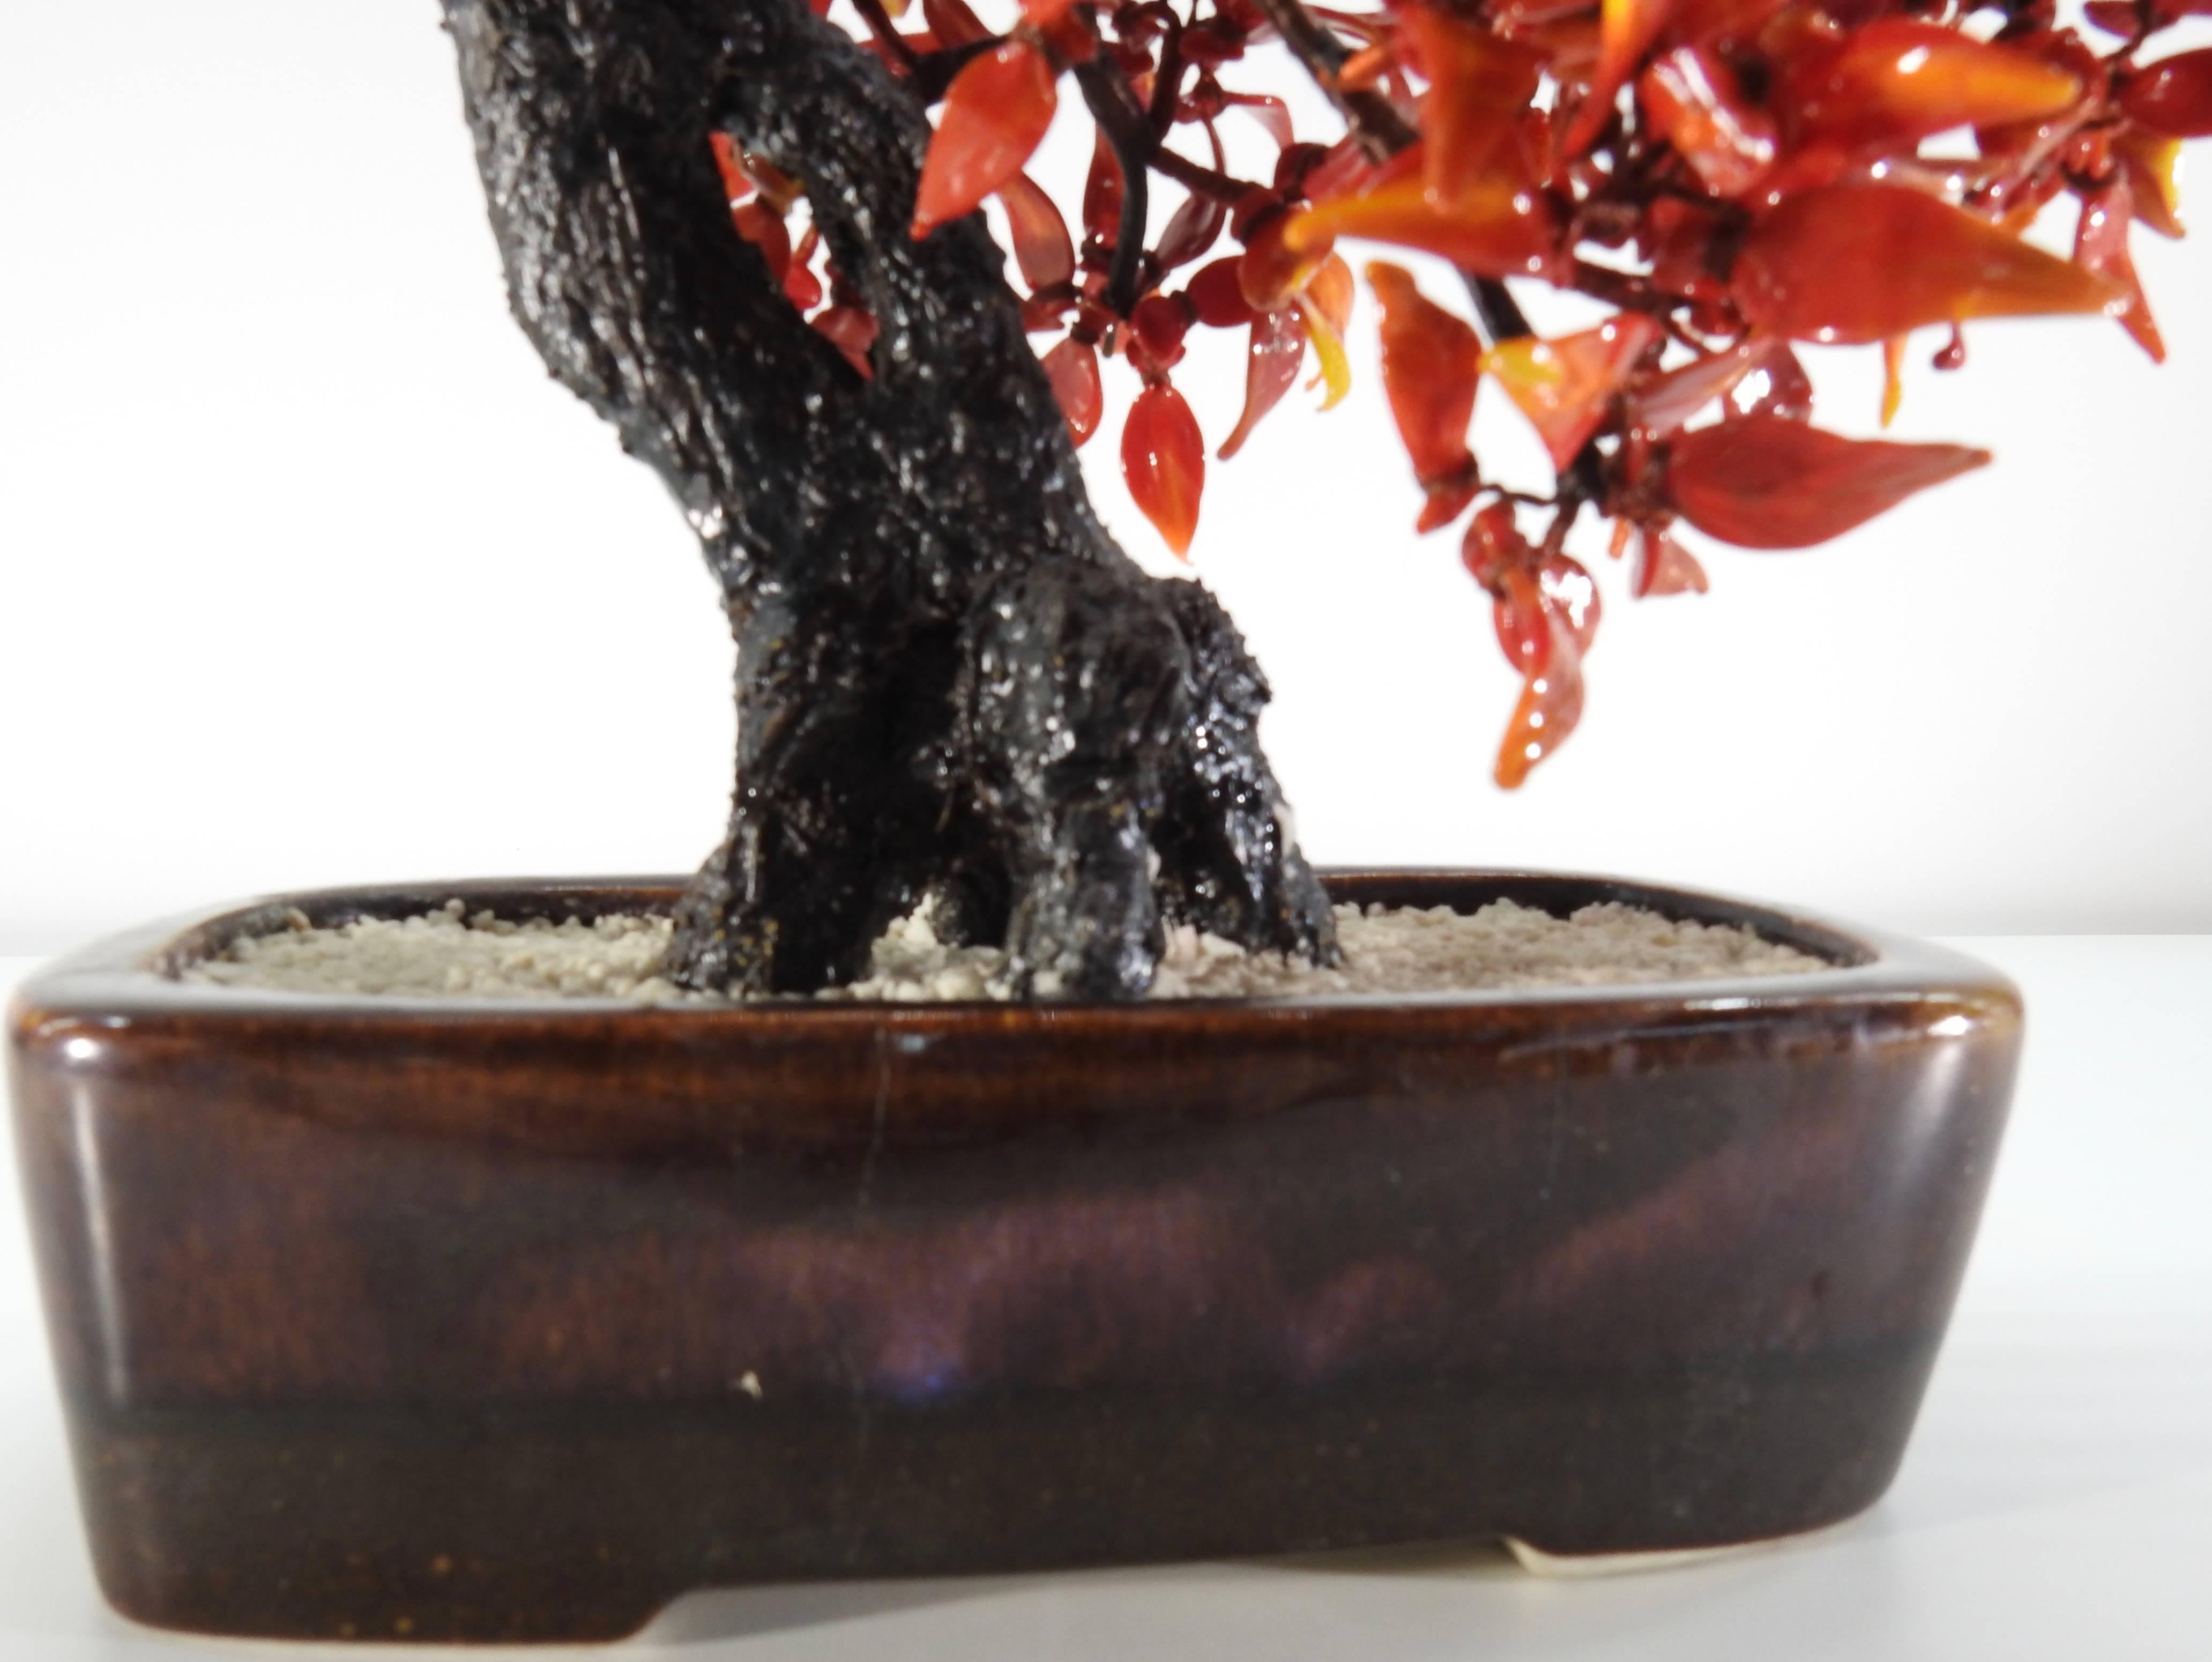 Burnished rust tones of polished glass form the leaves on this Bonsai tree from the 1940s. The branches are neatly covered in silk threads, coming out from the trunk. The tree is planted in a bed of tiny stones which is in a ceramic planter.
 